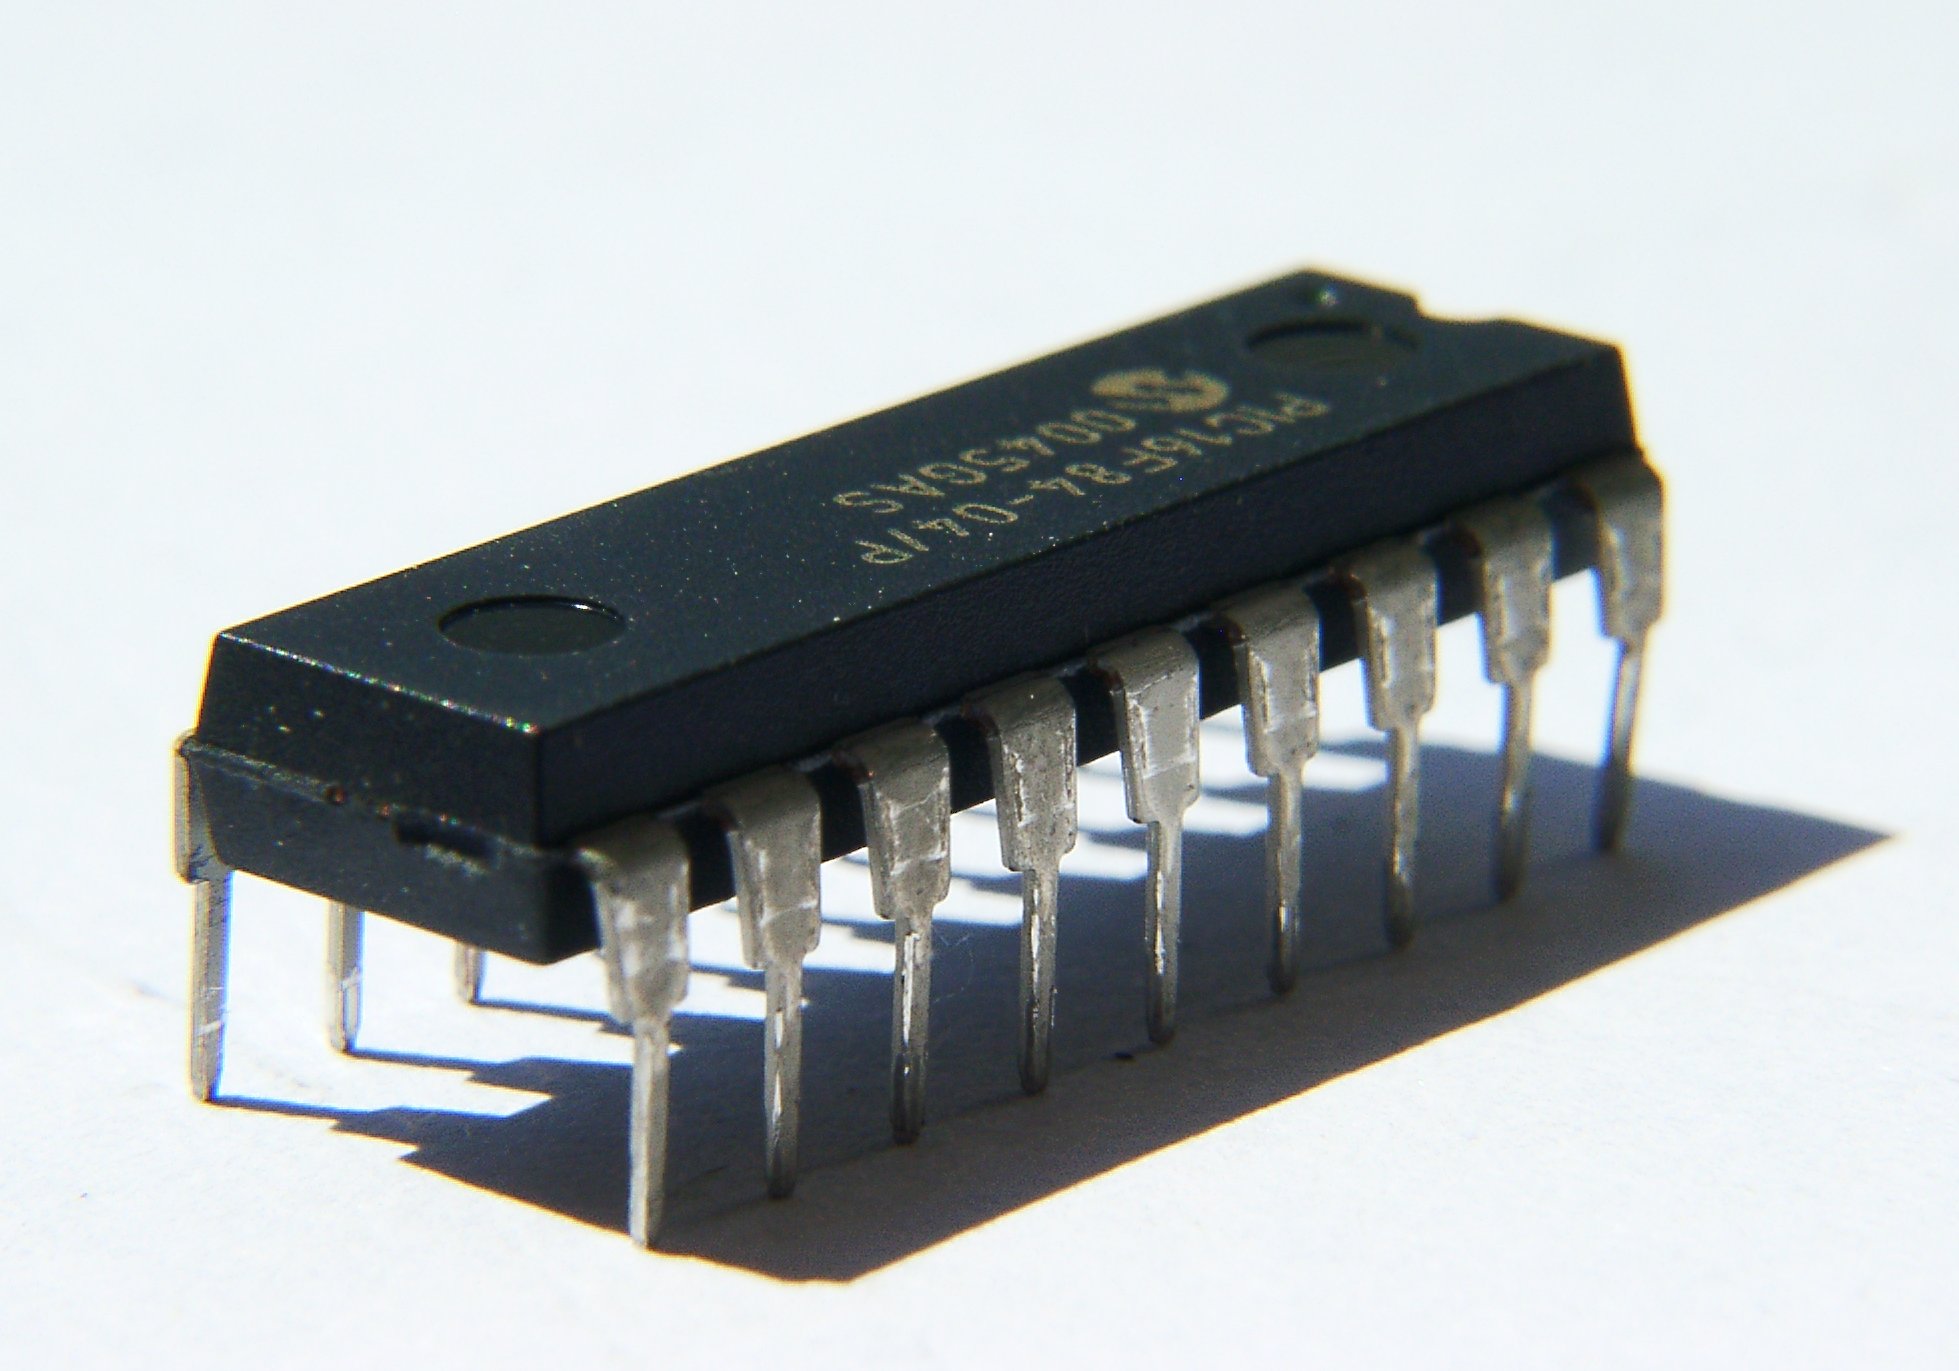 Integrated Circuits (“ICs”) are your friends! – OpenProcessLab